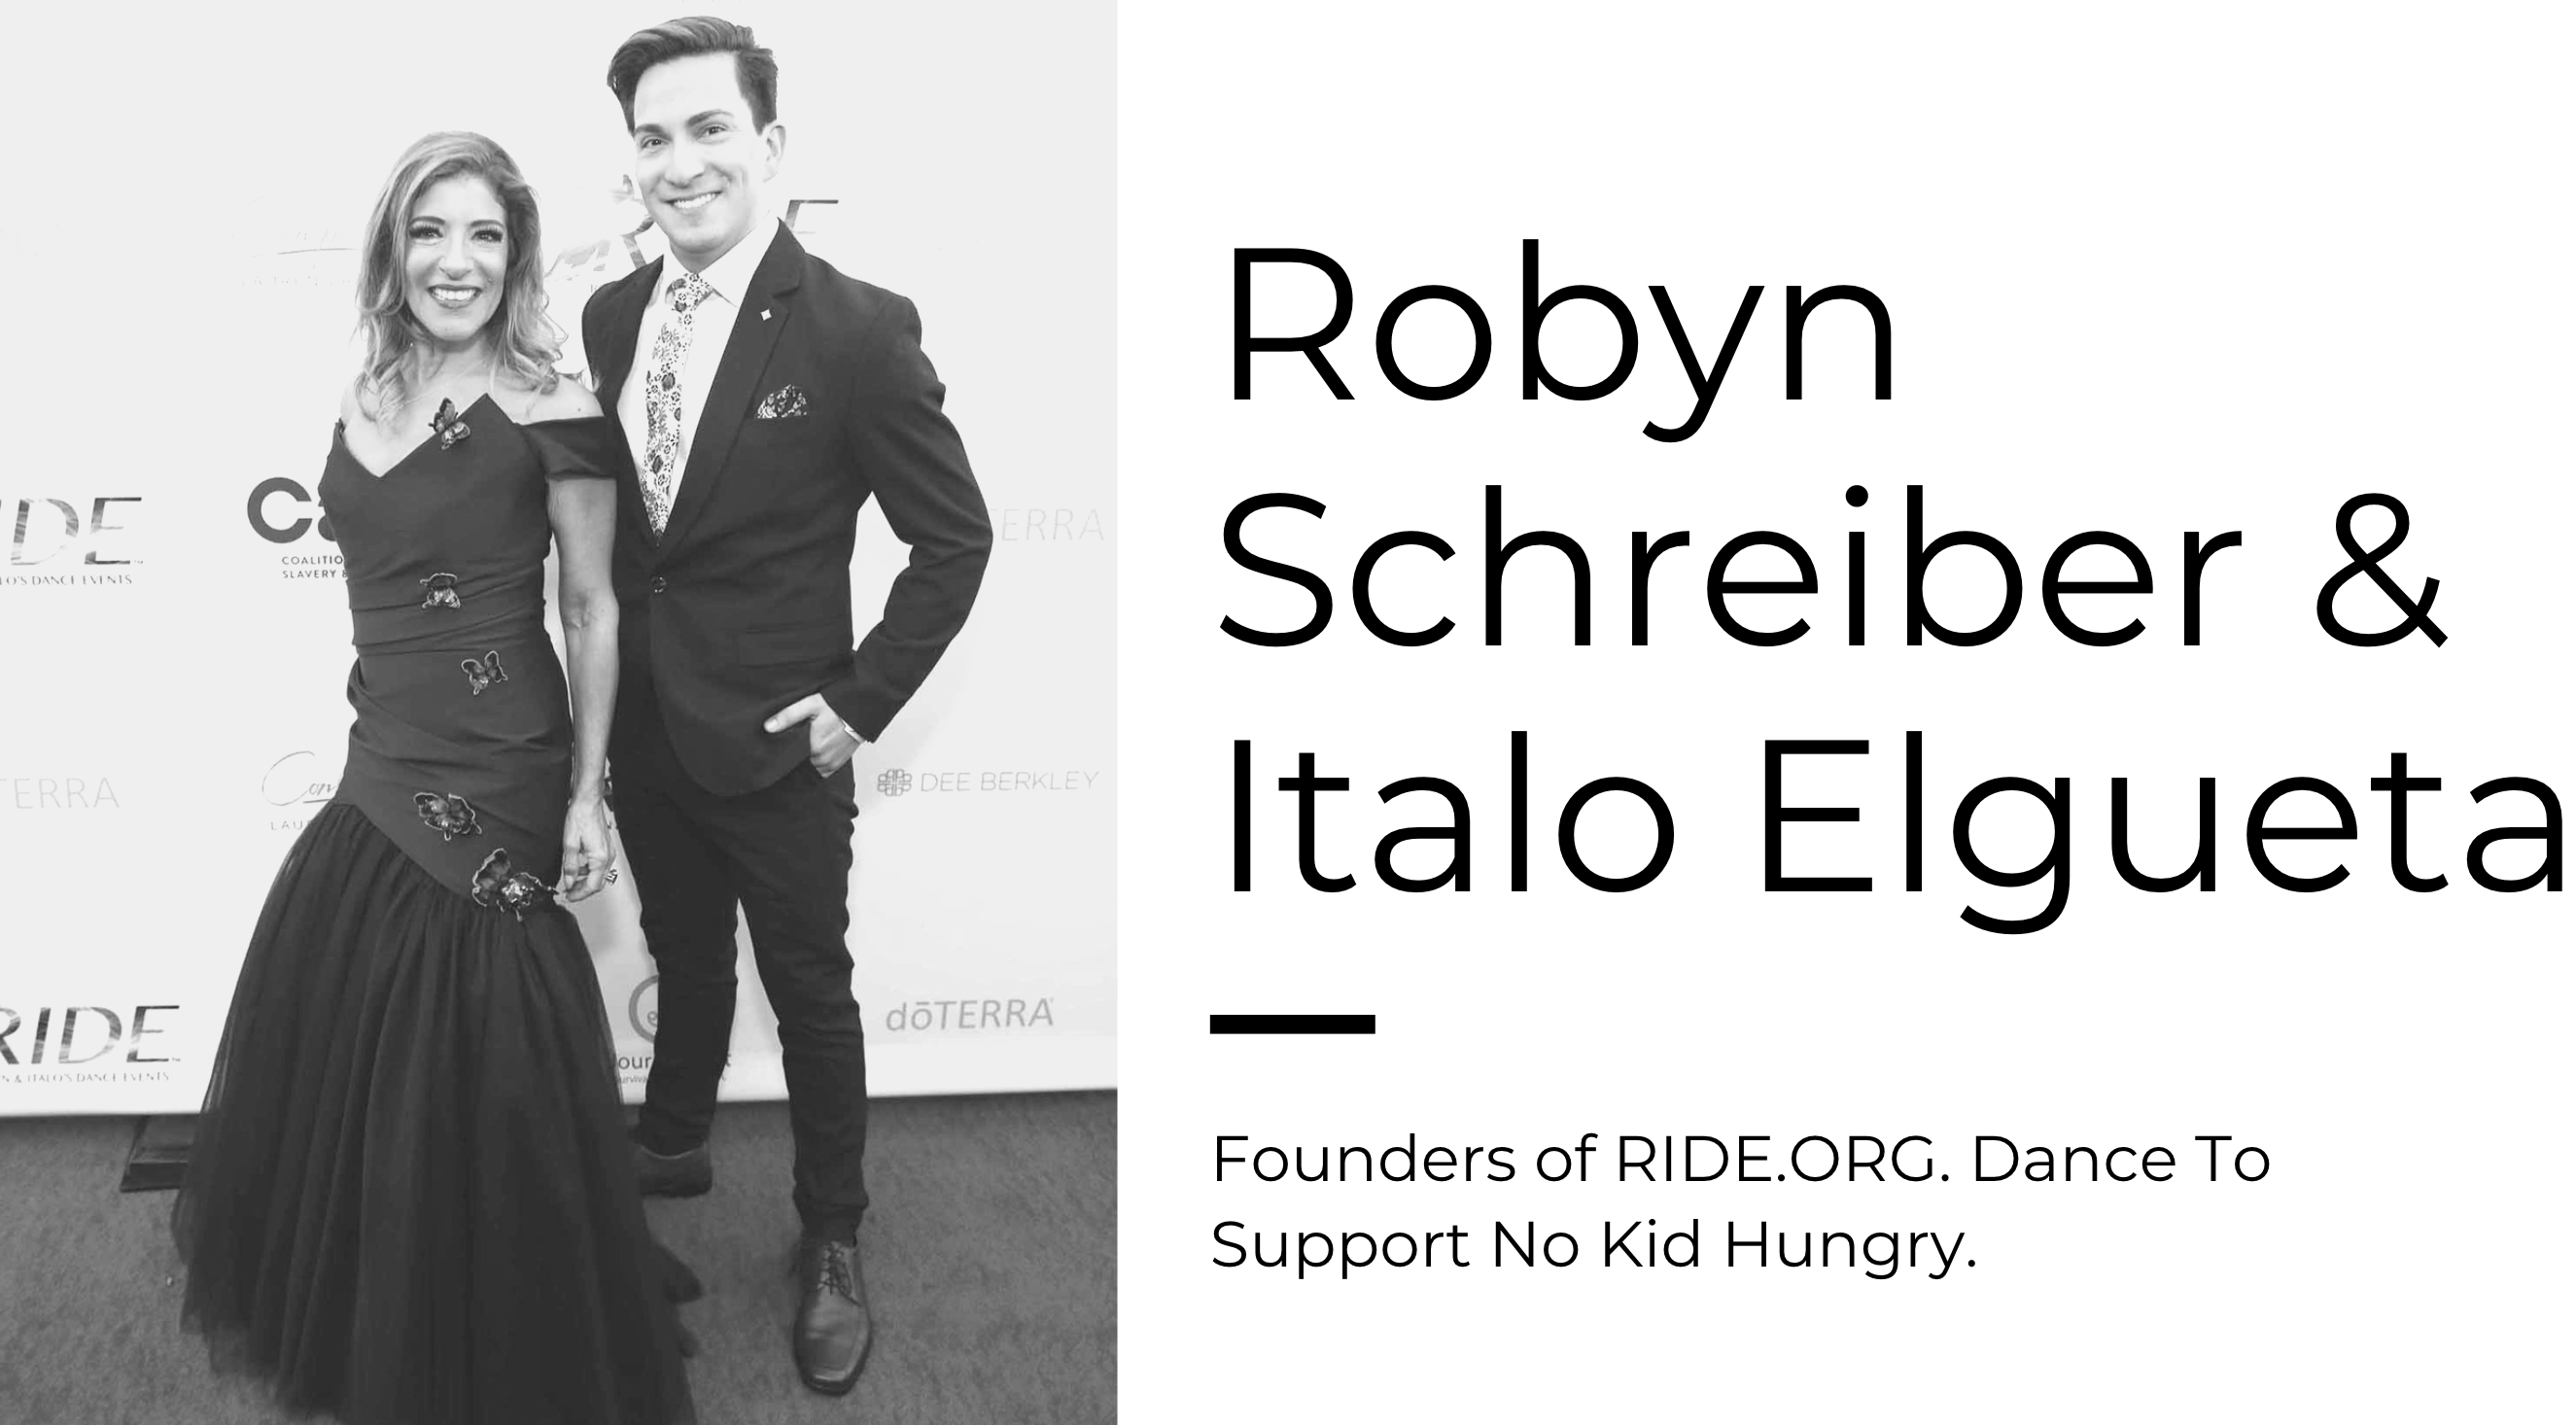 Founders of RIDE.ORG Robyn Schreiber & Italo Elgueta Dance To Support No Kid Hungry. - Lamo Footwear